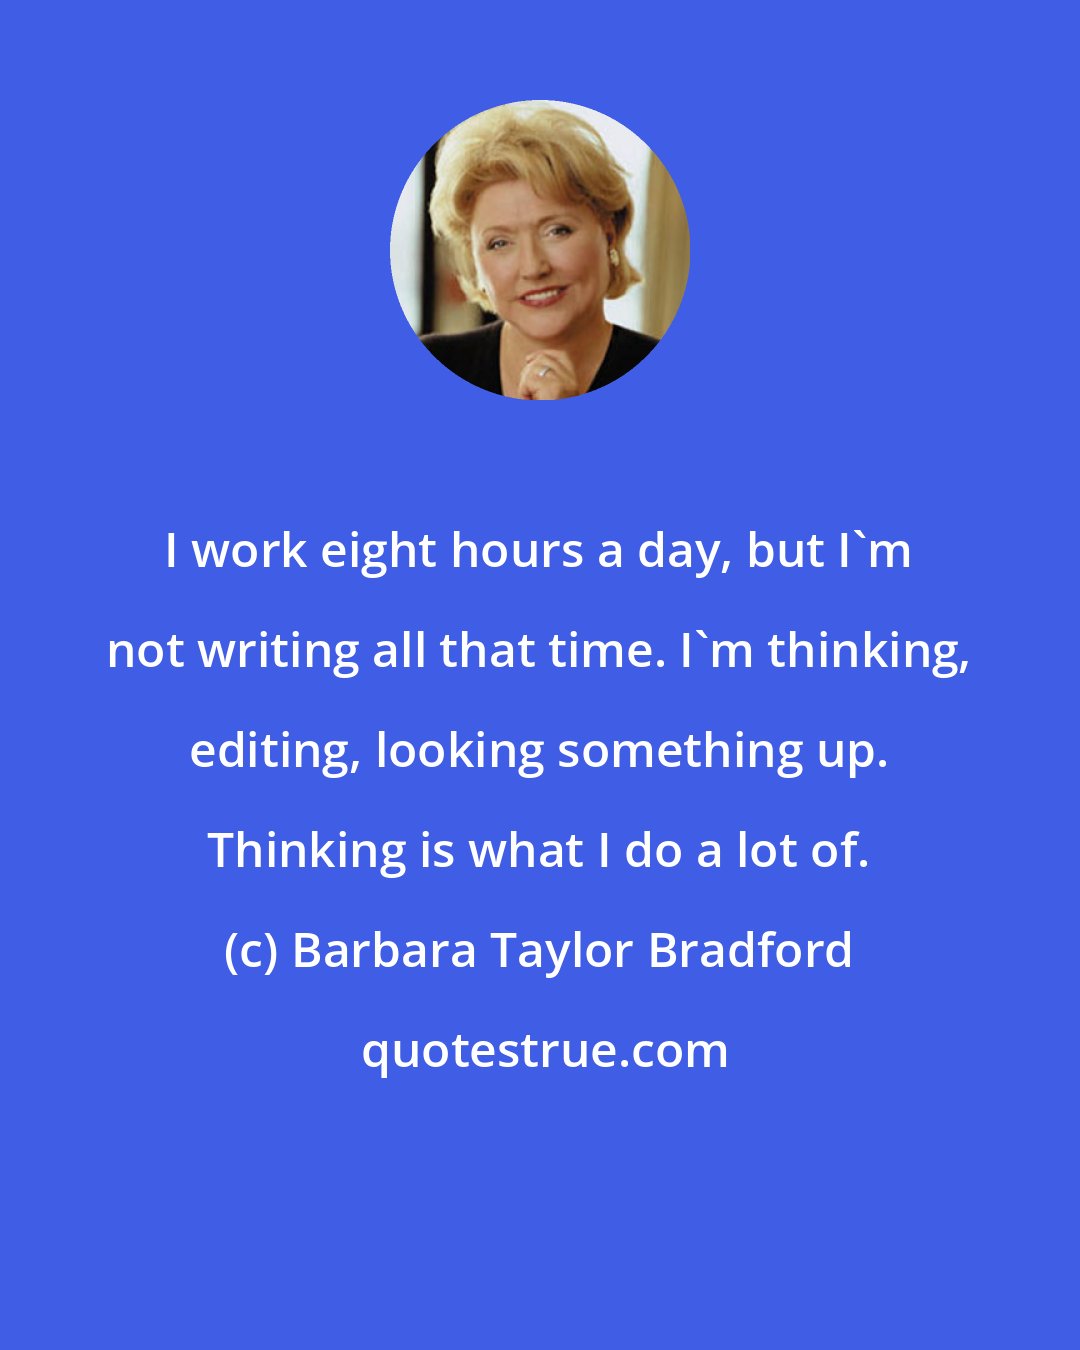 Barbara Taylor Bradford: I work eight hours a day, but I'm not writing all that time. I'm thinking, editing, looking something up. Thinking is what I do a lot of.